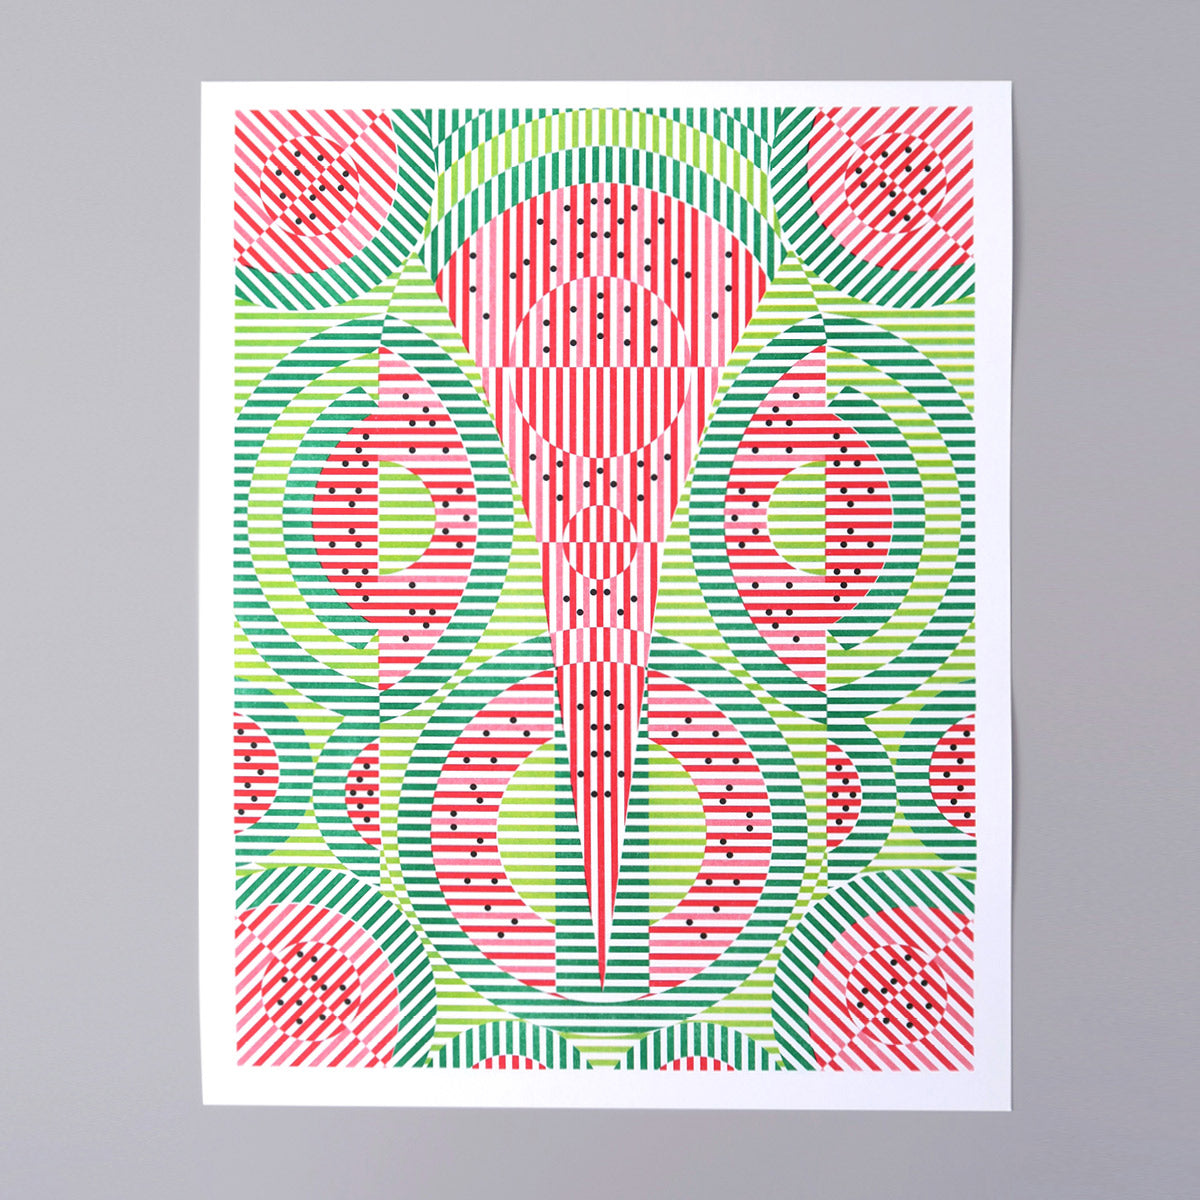 This print is called Watermelon. It has lime green, green, red, and black. The black dots are the seeds and it's an abstract representation of watermelon. 